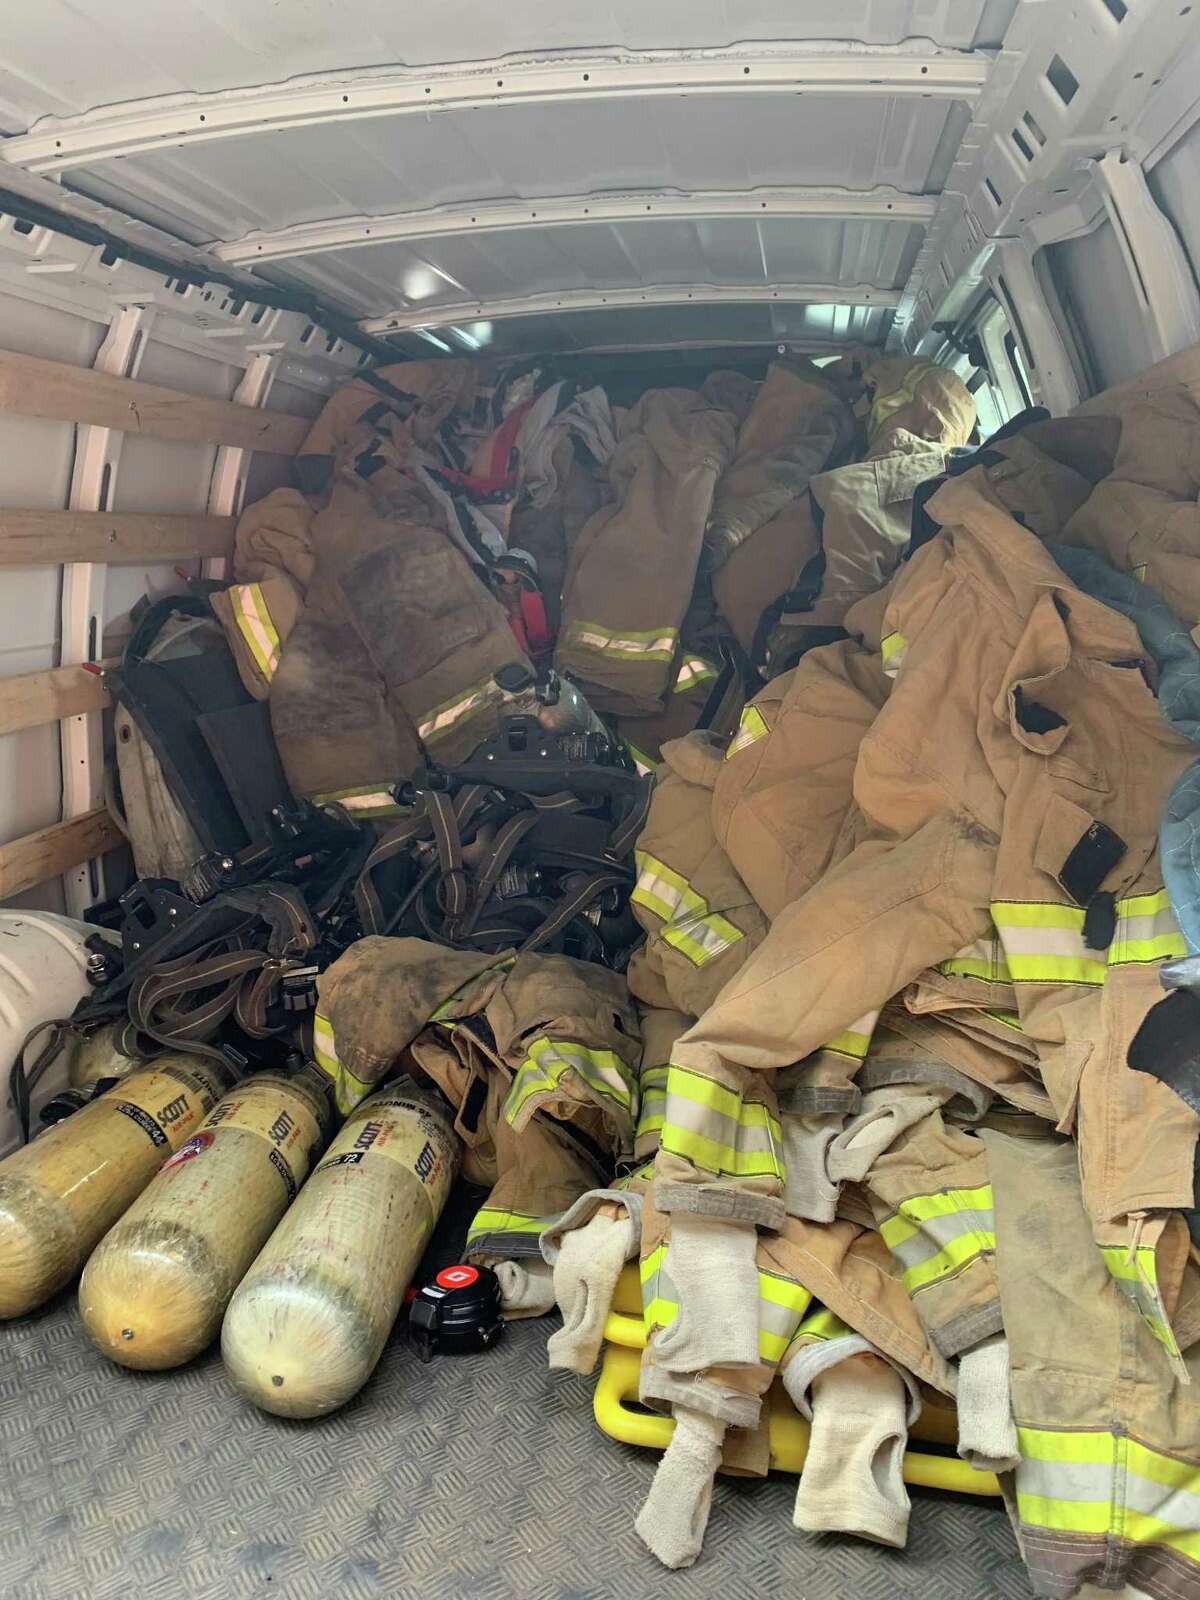 The Turn of River Fire Department in Stamford donated a truckload of equipment to Ukrainian first responders as a part of a tri-state effort led by a New Jersey firefighter and Ukraine native.